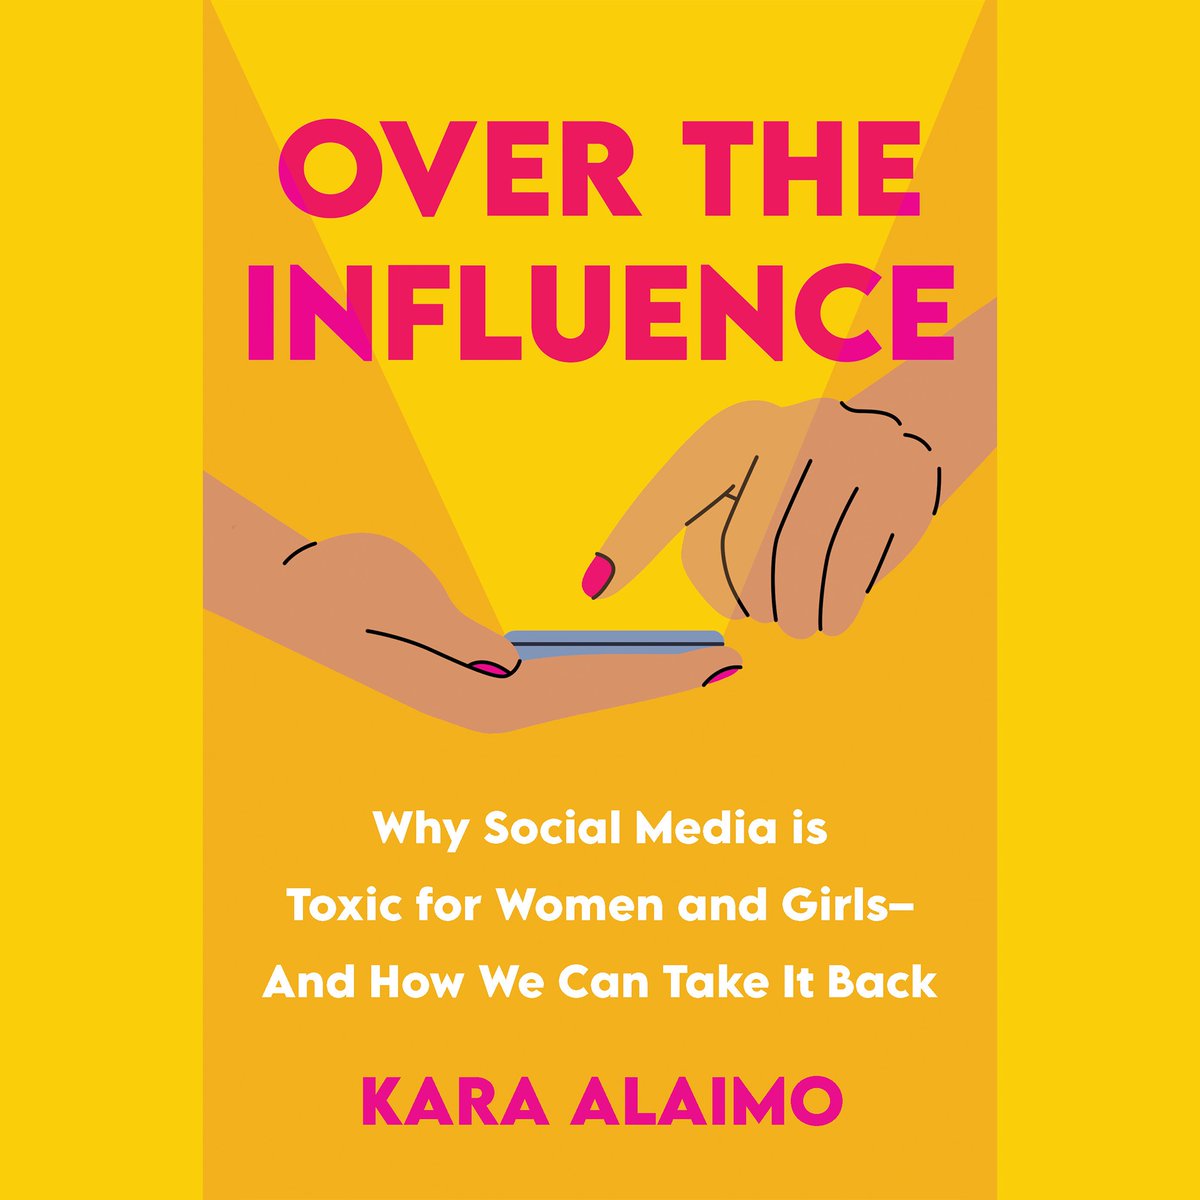 OVER/UNDER it all: @jopiazza is giving away a copy of my book OVER THE INFLUENCE on her Substack next week! Subscribe here: jopiazza.substack.com Stay tuned for my epsiode on her podcast UNDER THE INFLUENCE, too!